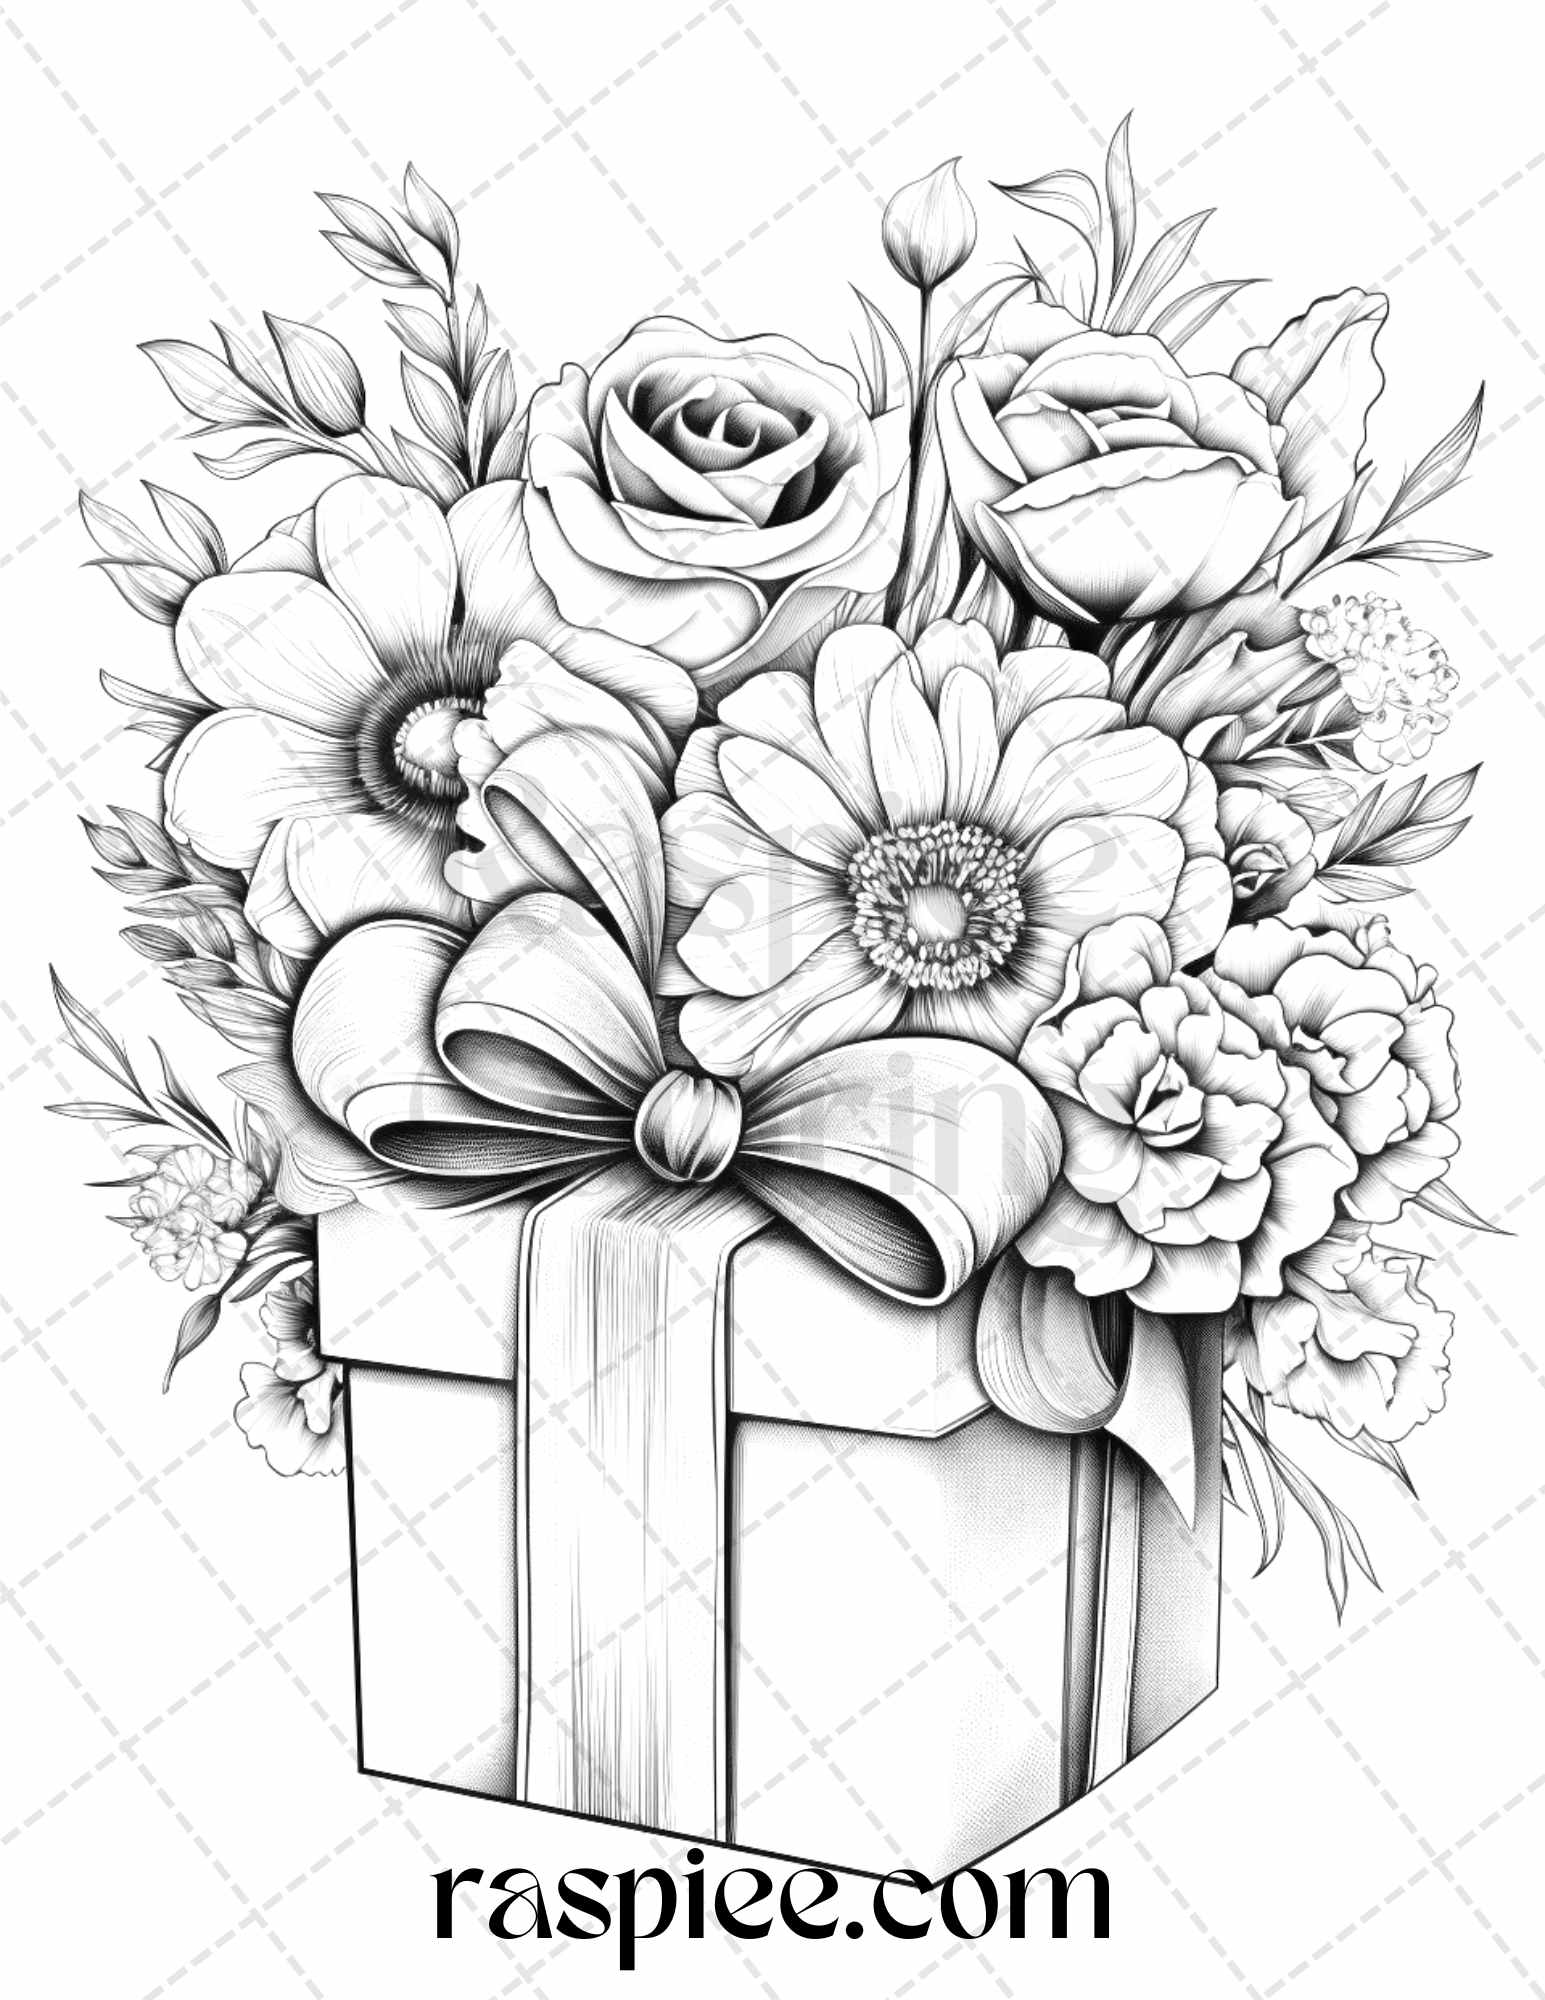 Flower Gift Box Grayscale Coloring Pages for Adults, Printable Coloring Pages for Kids and Adults, Relaxing Art Therapy Coloring Sheets, Flower Design Coloring Pages for Stress Relief, Grayscale Floral Coloring Book Images